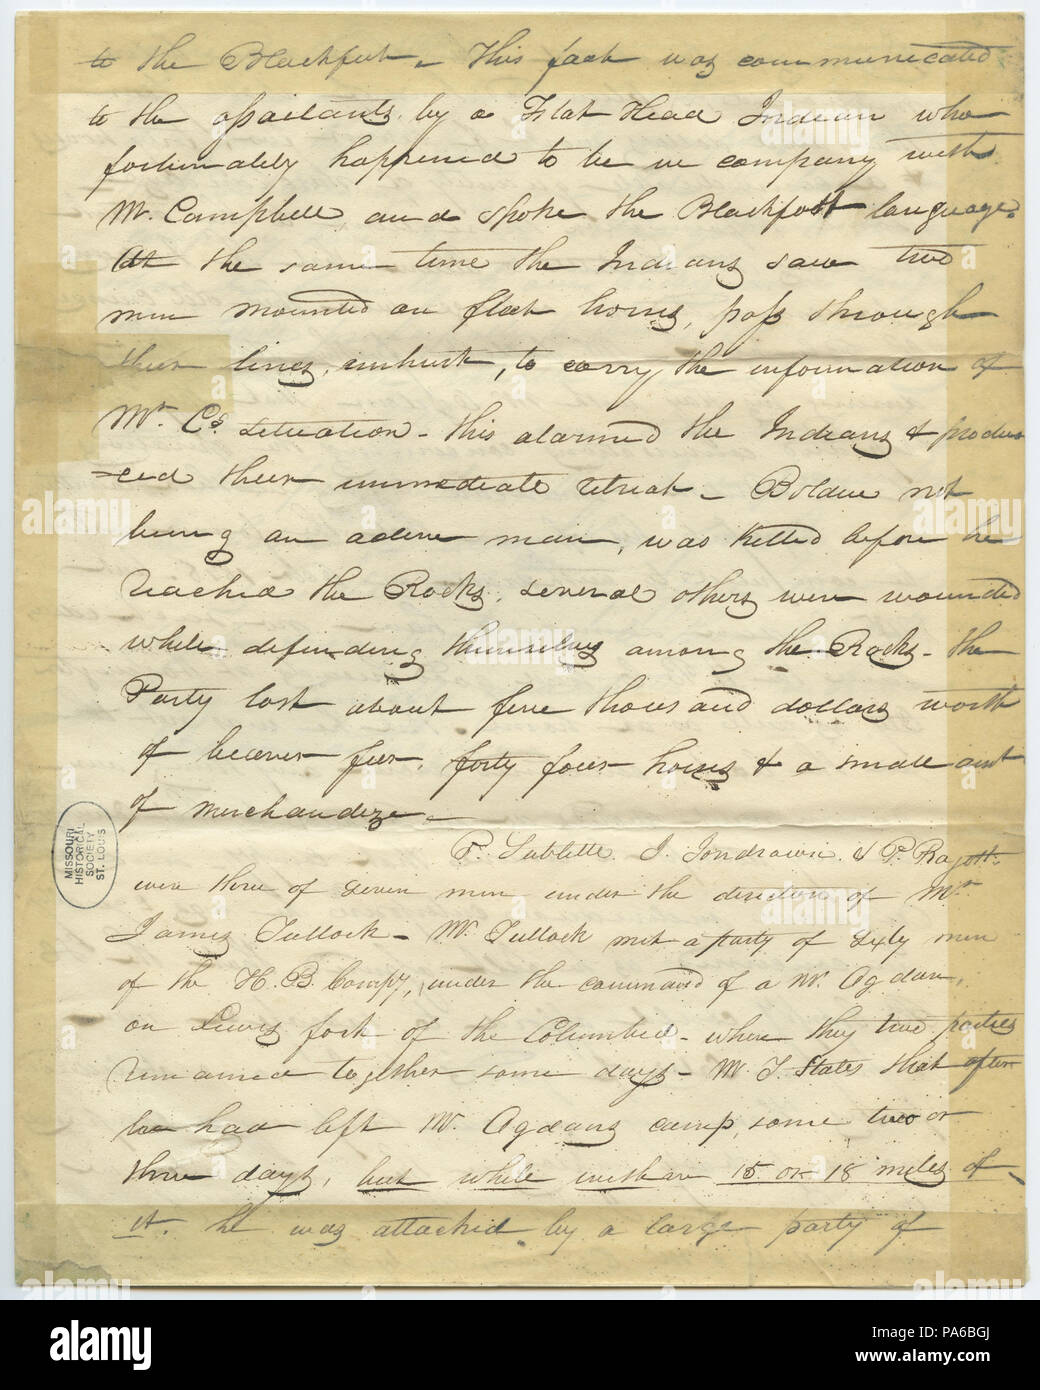 Fragment of letter of William H. Ashley begins: “. . . to the Blackfeet -- This fact was communicated . . .”, page 1, ca. January 20, 1829. William Henry Ashley Collection, Missouri History Museum Archives, St. Louis. ID Number=A0059-00068. File Name=A0059-00068 0001. 667 Fragment of letter of William H. Ashley begins- “. . . to the Blackfeet - This fact was communicated . . .”, ca. January 20, 1829 Stock Photo